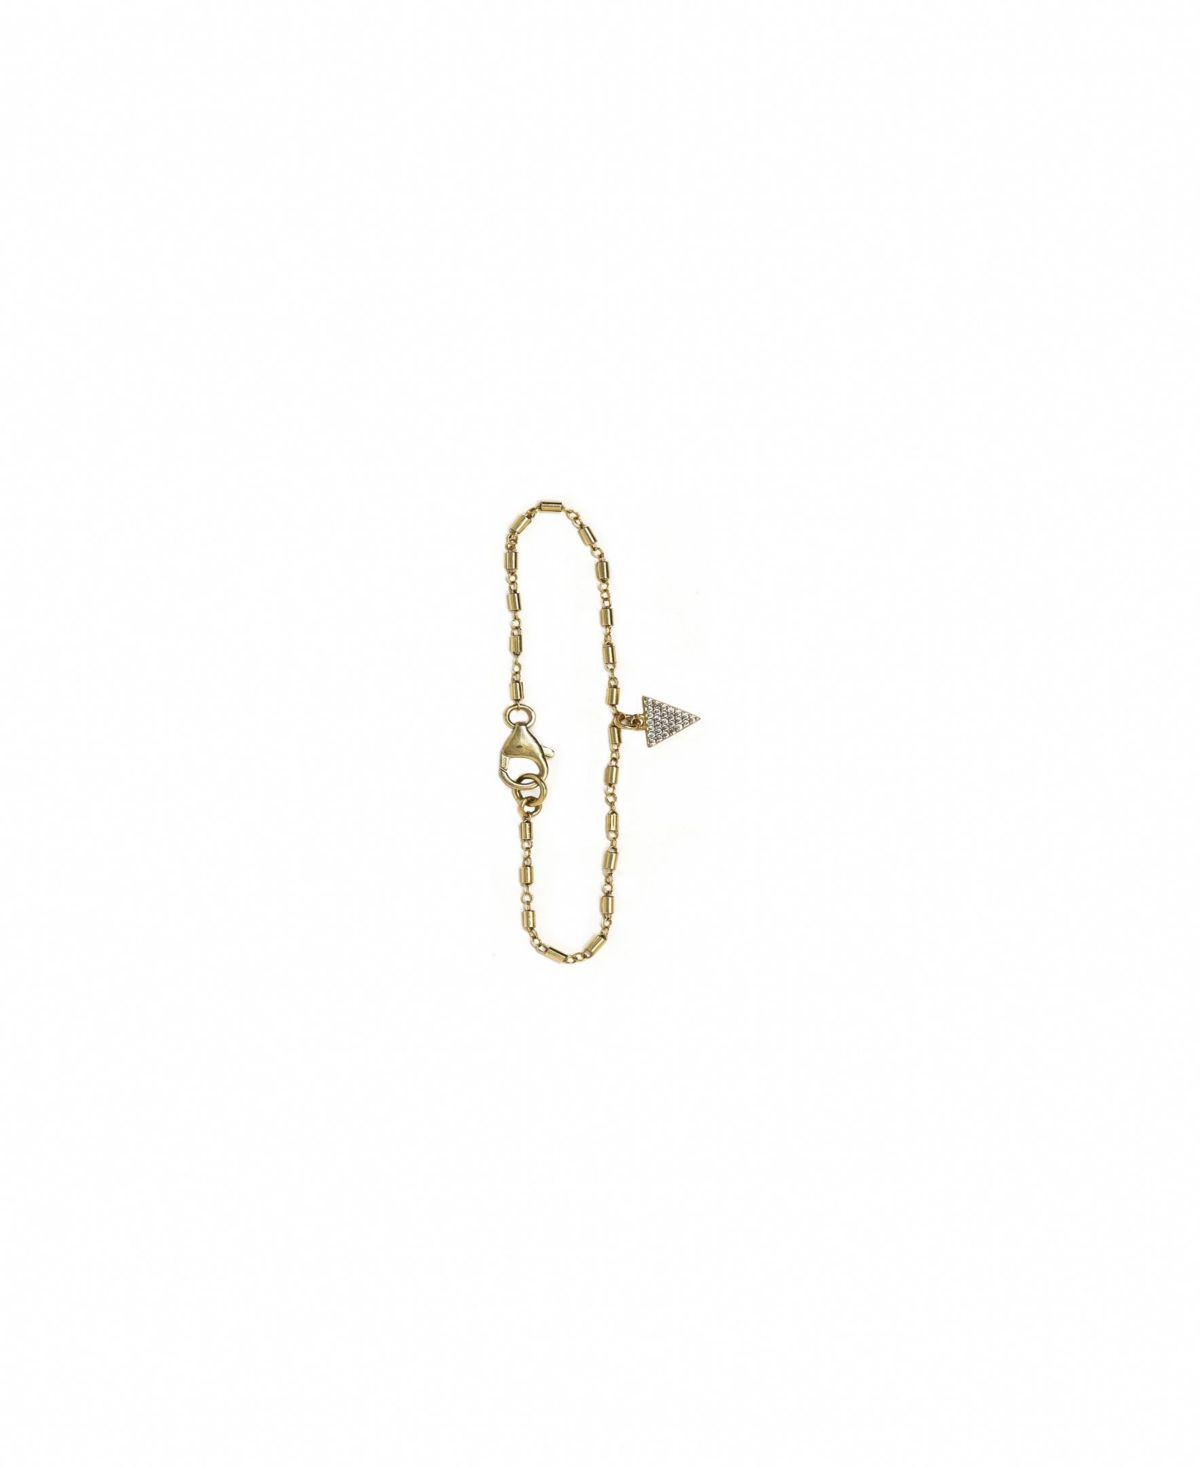 14k Gold Filled Single Strand Bracelet with Pave Triangle Charm - Clear